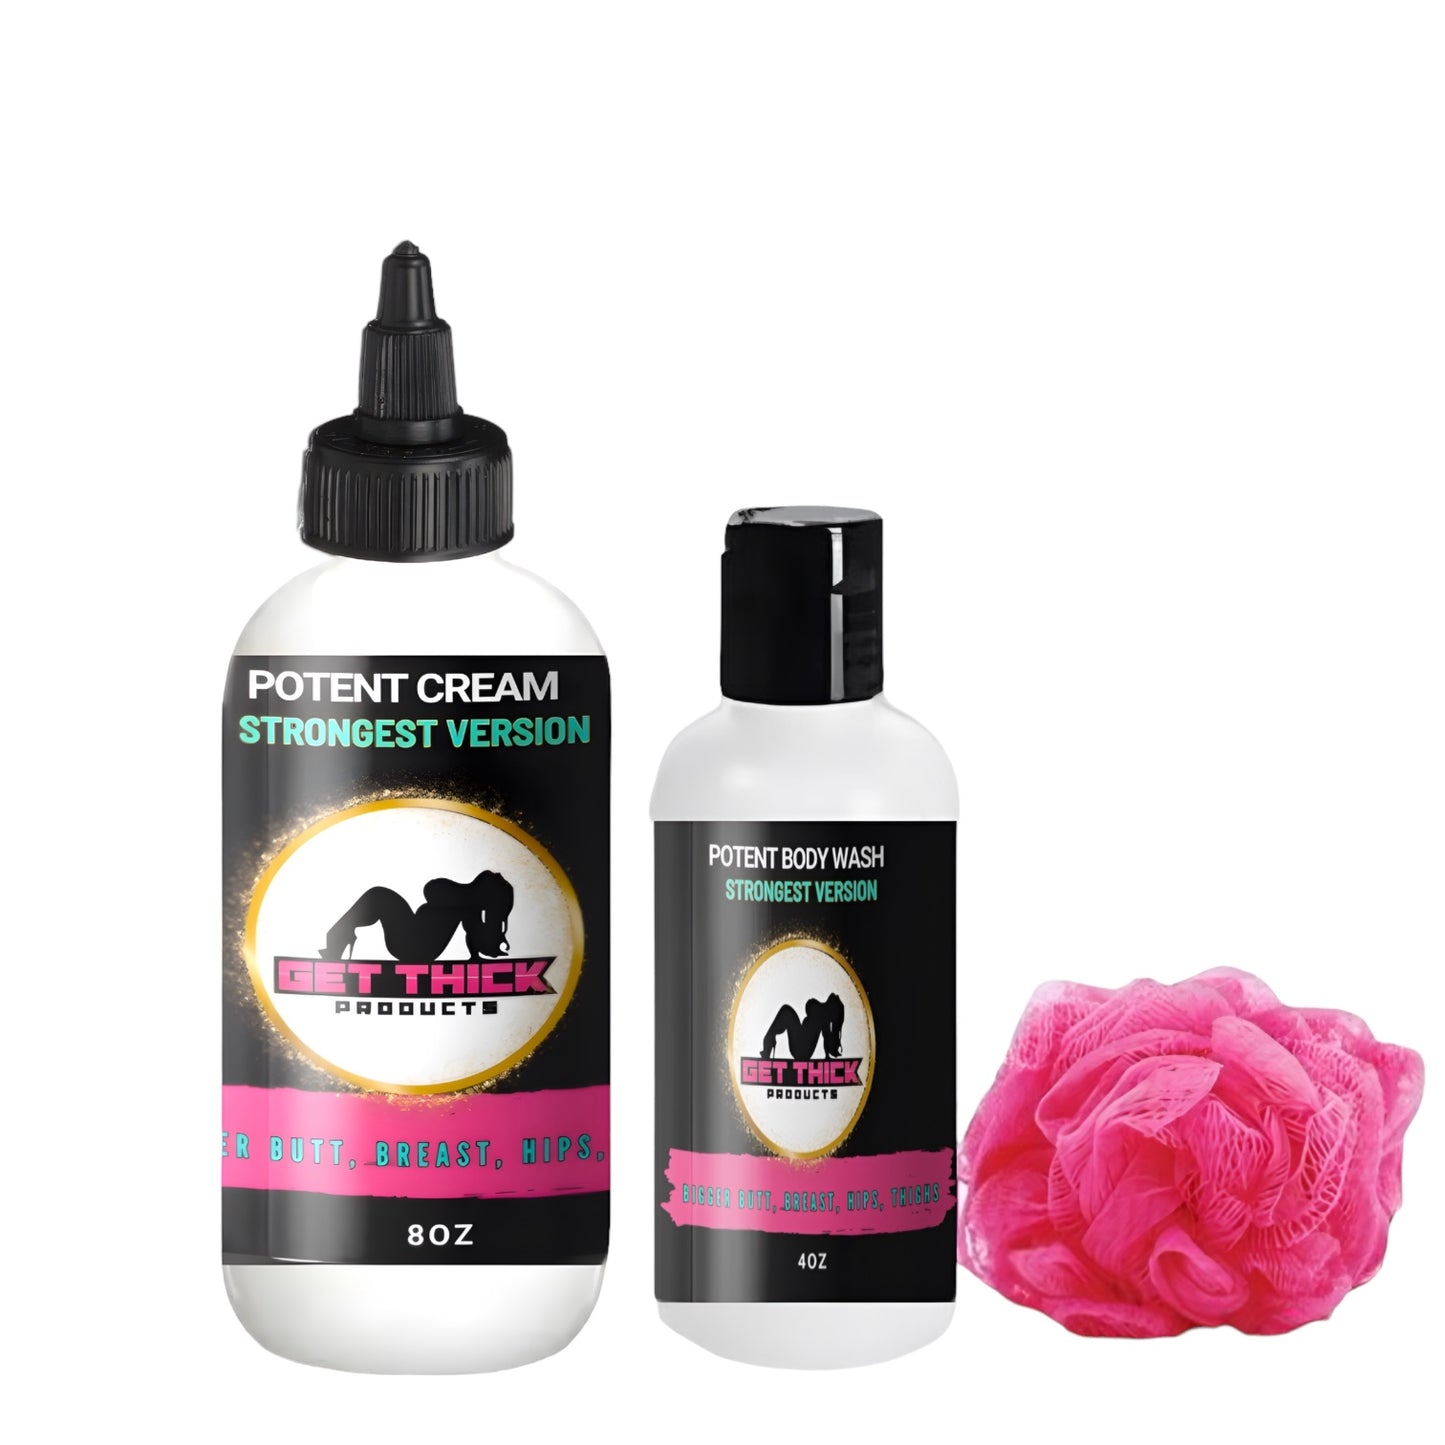 Get Thick “CELEBRITY” Potent Cream + Potent Body Wash